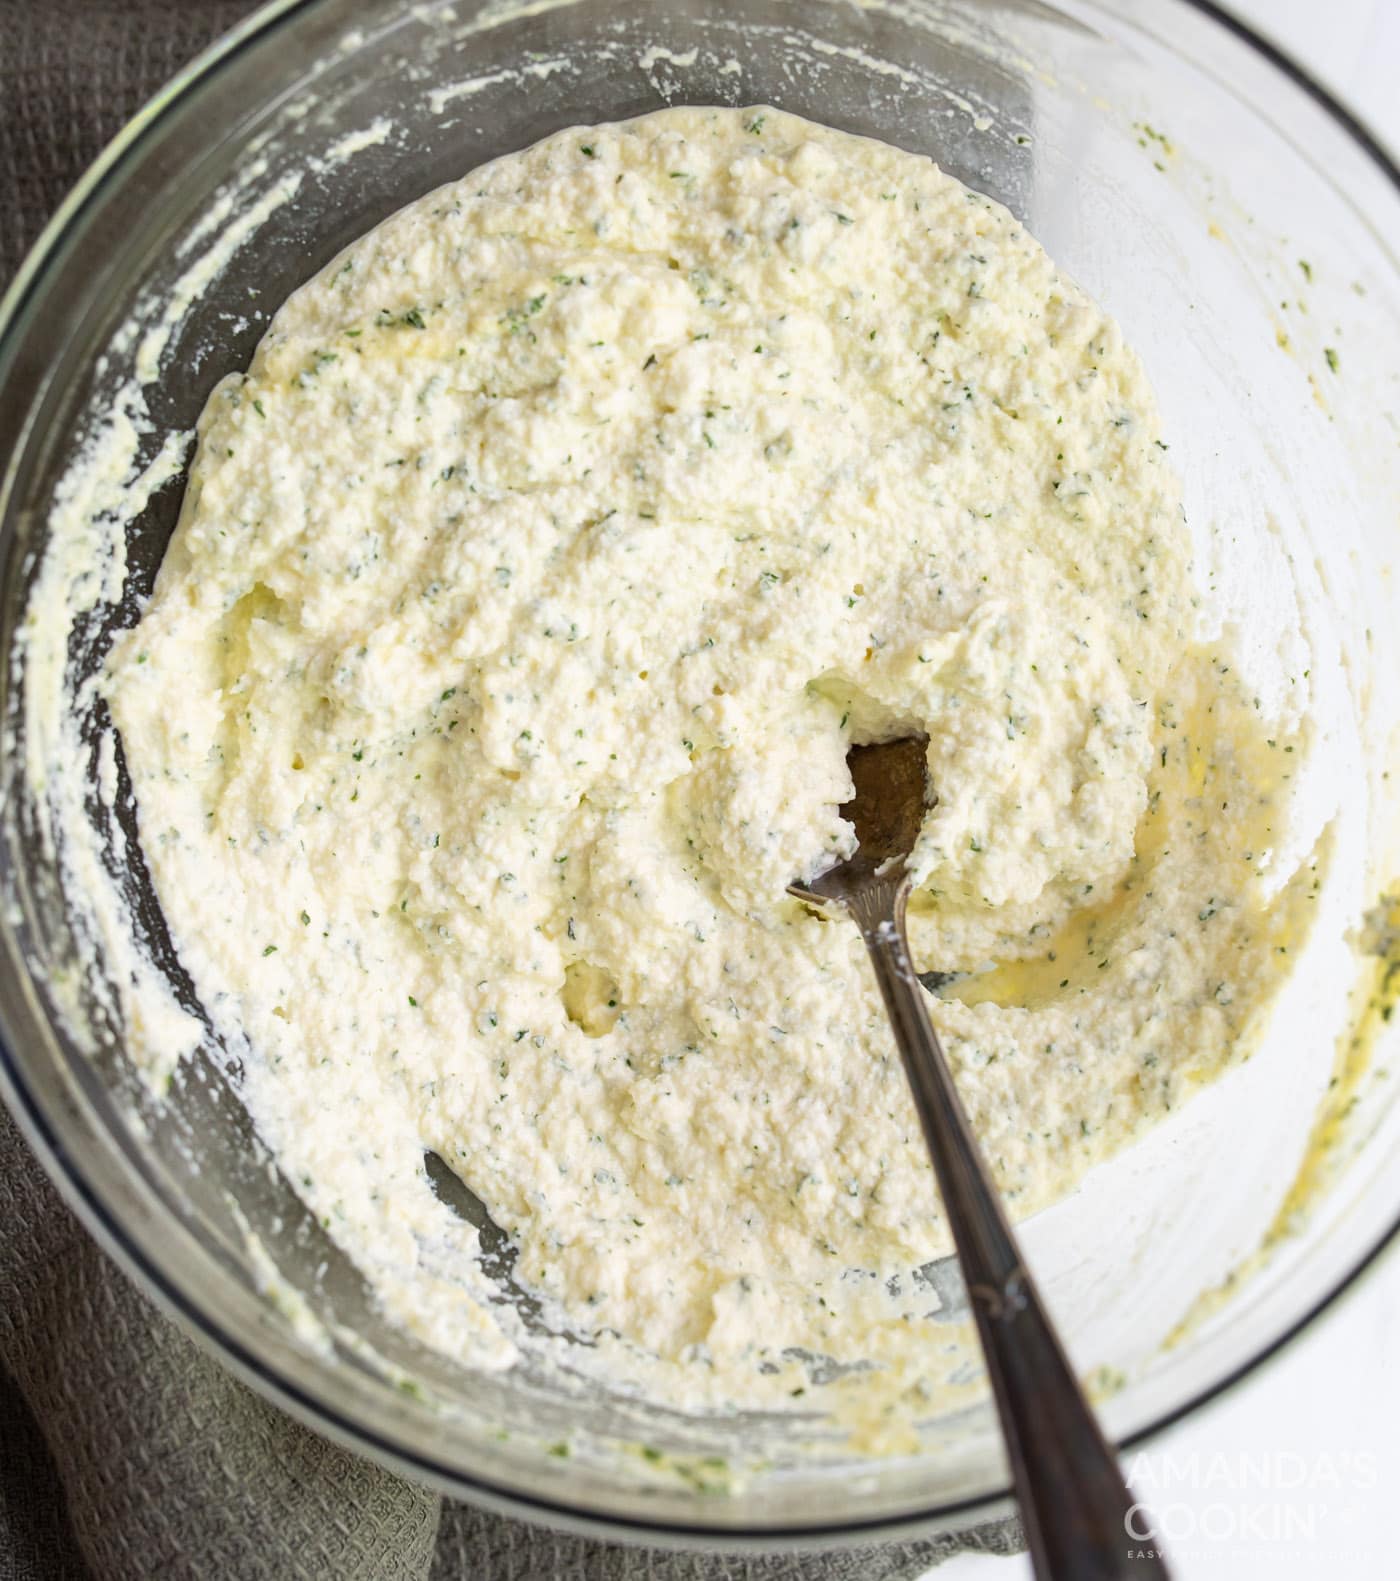 ricotta, egg, and parsley mixed in a bowl